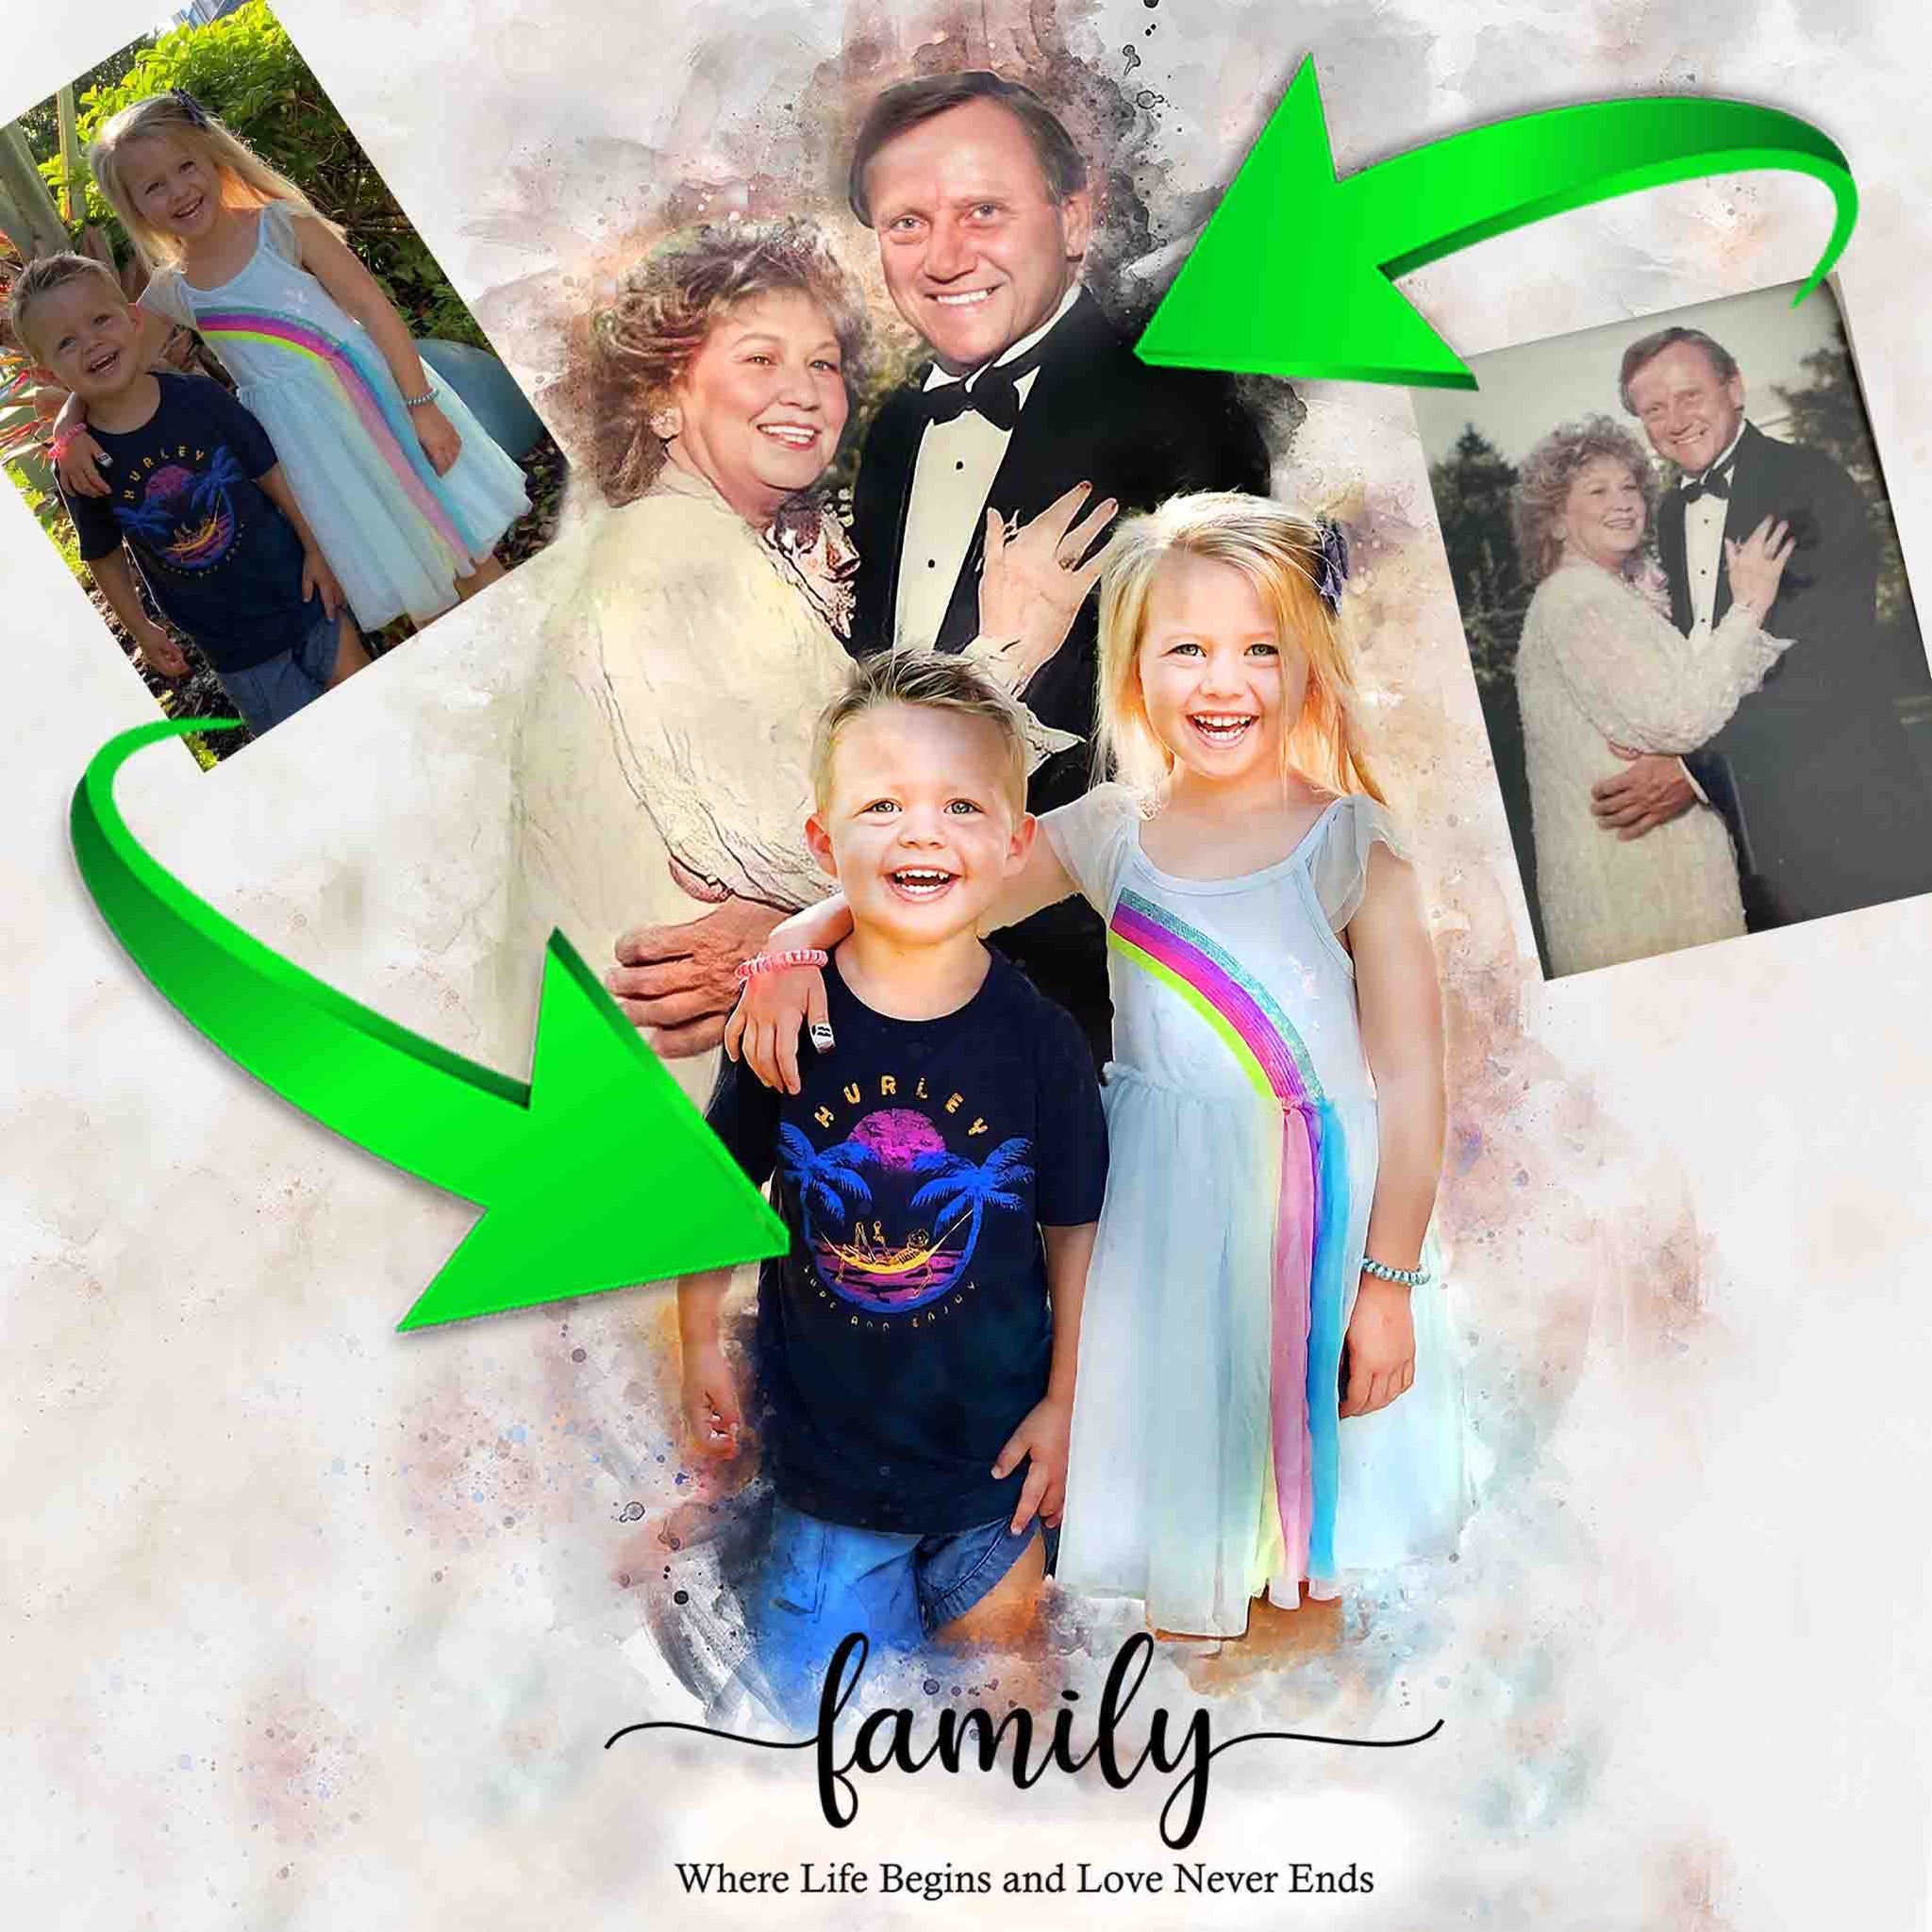 Picture of Loved one who Passed, Custom Picture with Deceased Loved One in Background, Add People into a Picture - FromPicToArt